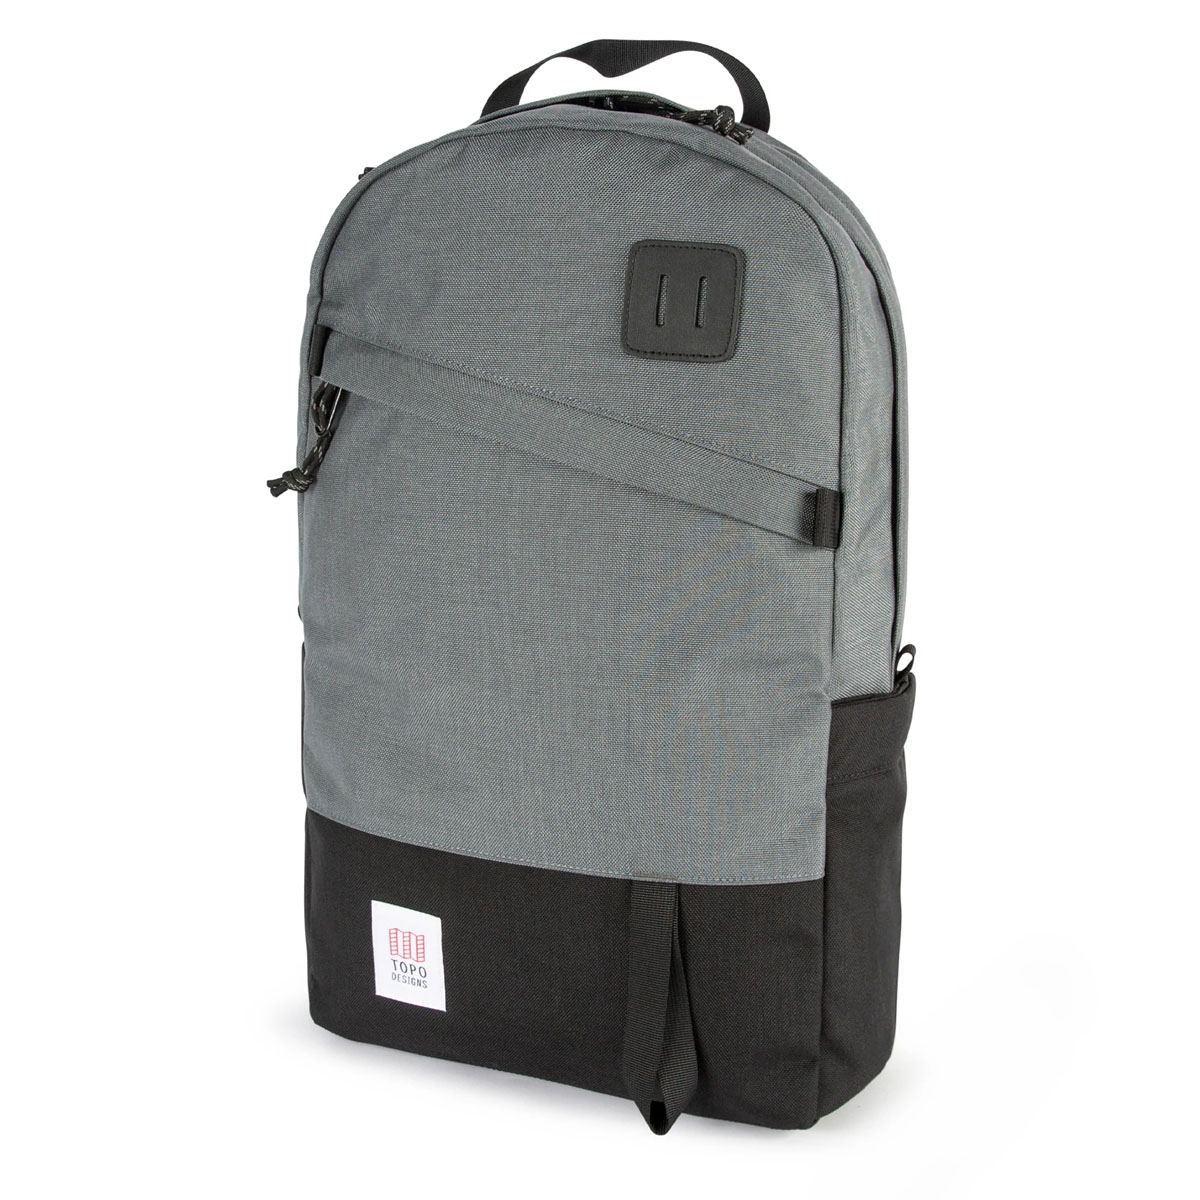 Topo Designs Daypack Classic Charcoal/Black, strong backpack for